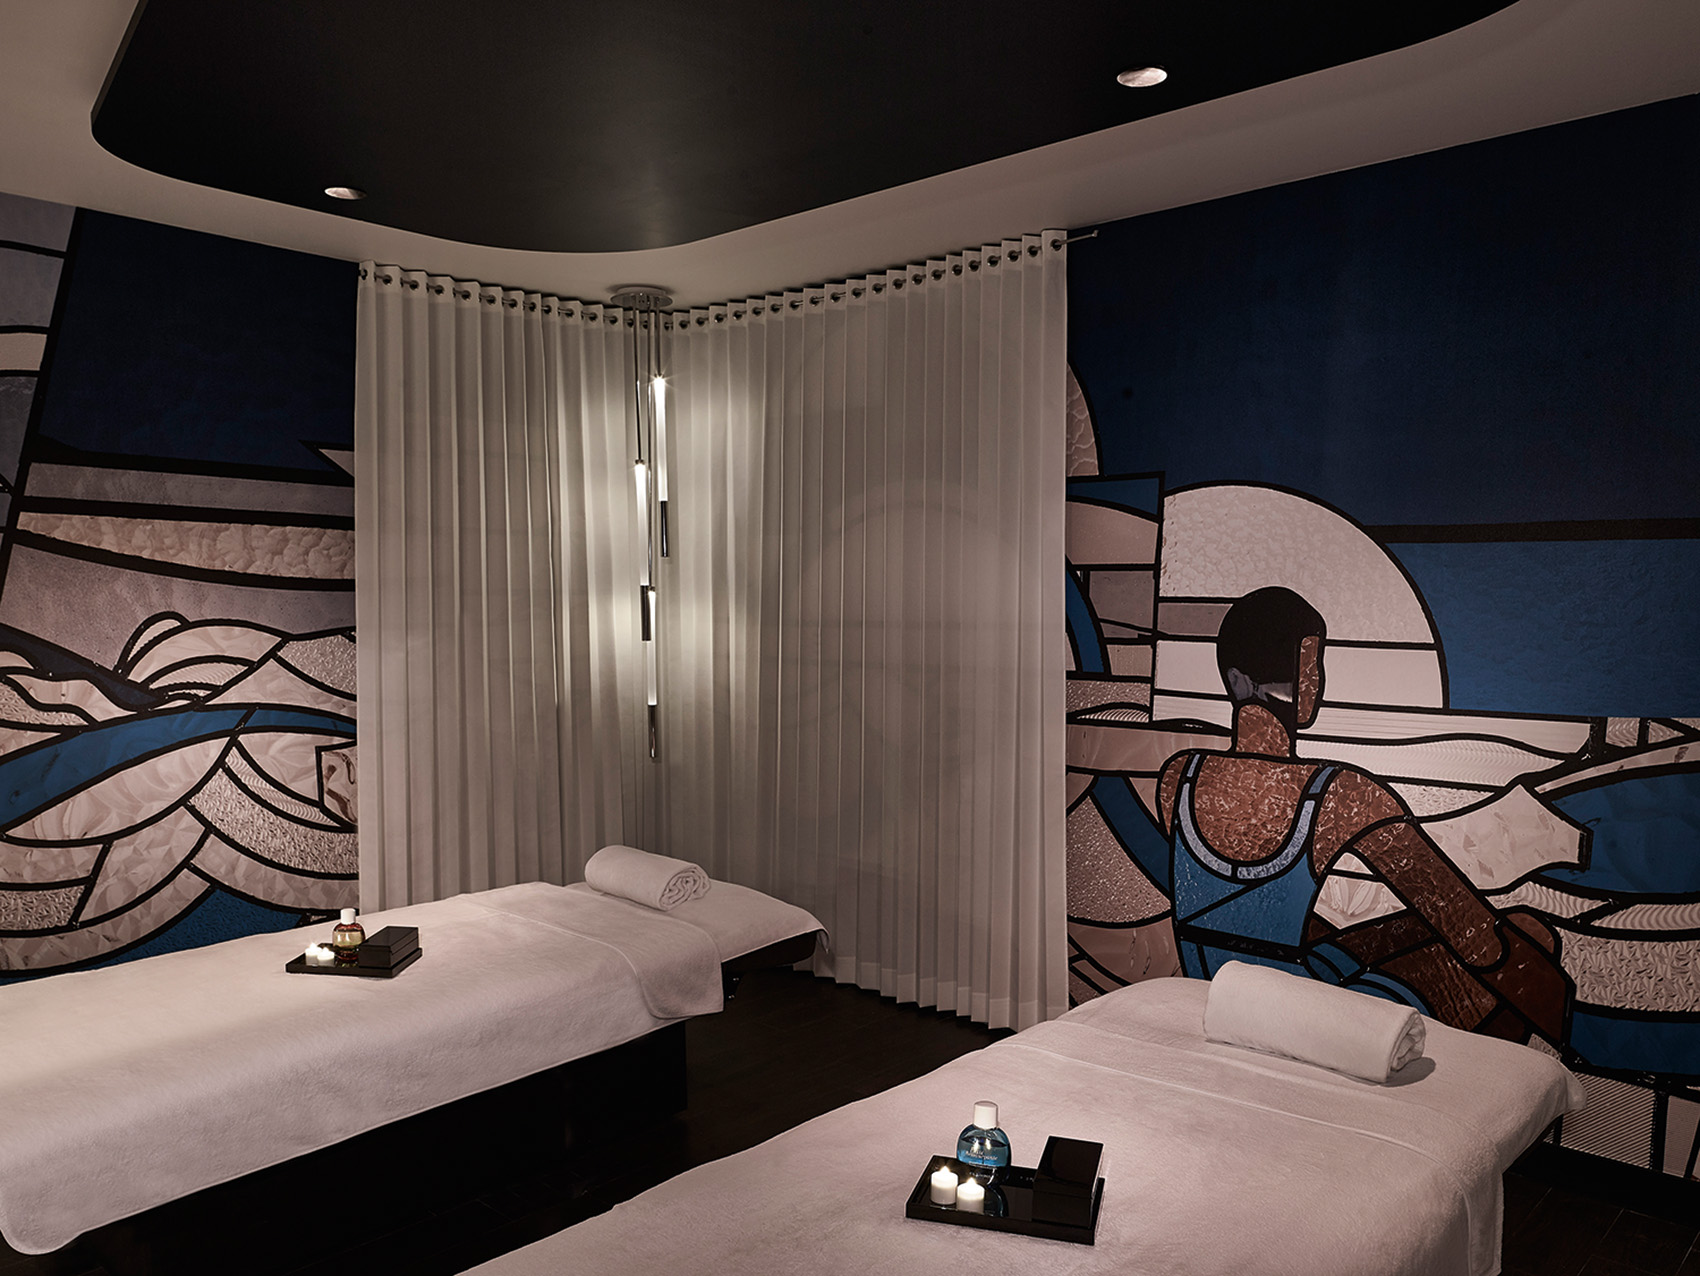 Massage room of the spa by clarins at the molitor pool in paris designed by the interior design studio jean-philippe nuel, interior decoration with original frescos